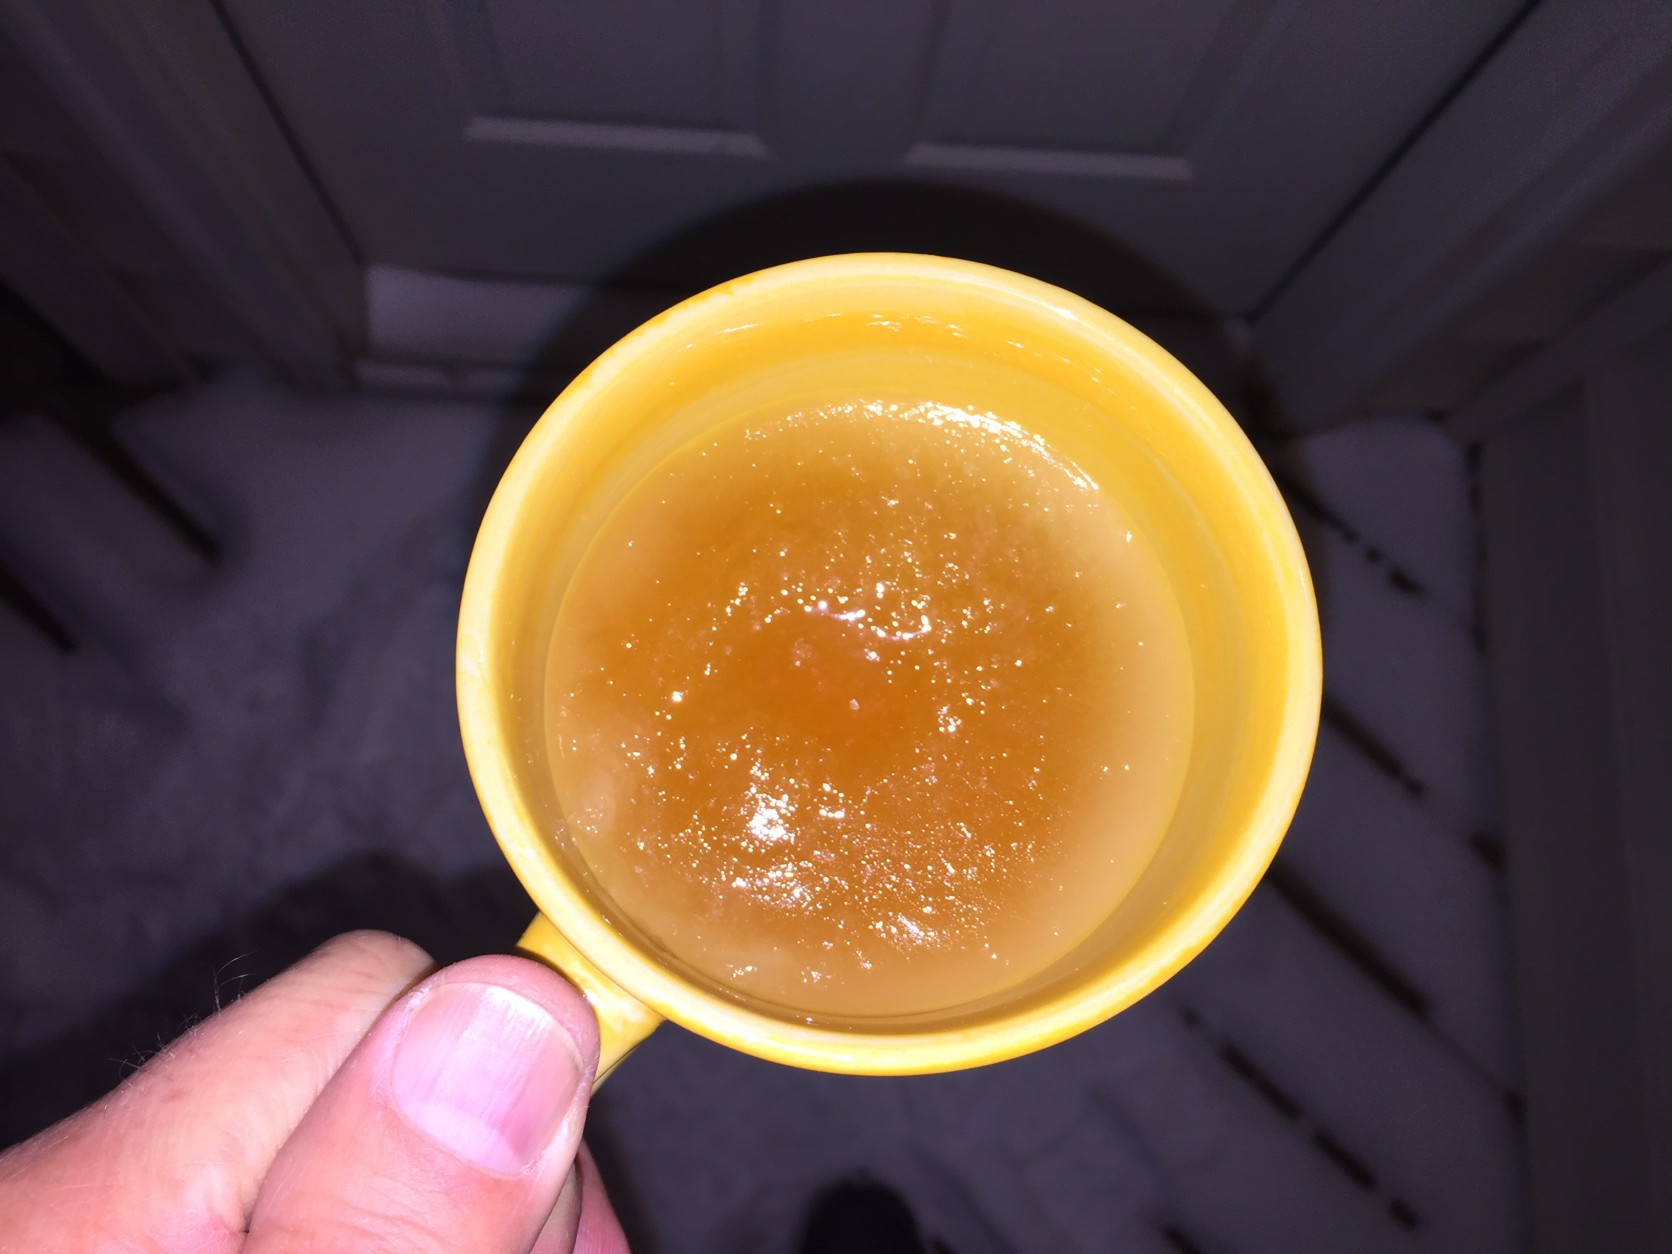 After 90 minutes outside, the apple juice has a thin, but solid layer of ice on top. (WTOP/Neal Augenstein)